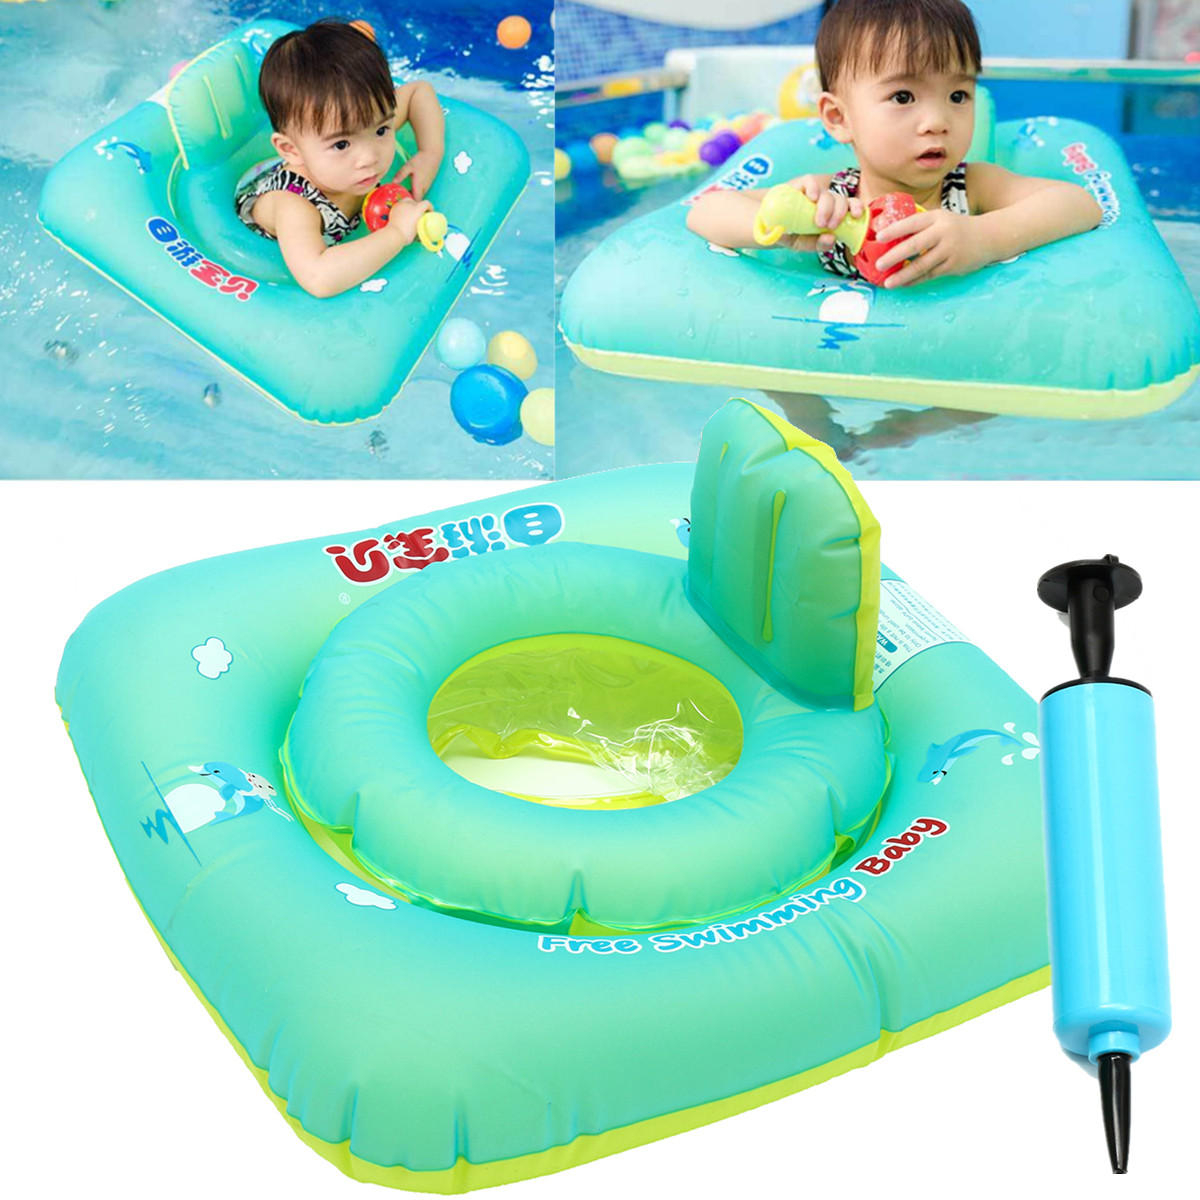 Baby Inflatable Swimming Pool Floats Swim Ride Rings Safety Chair...